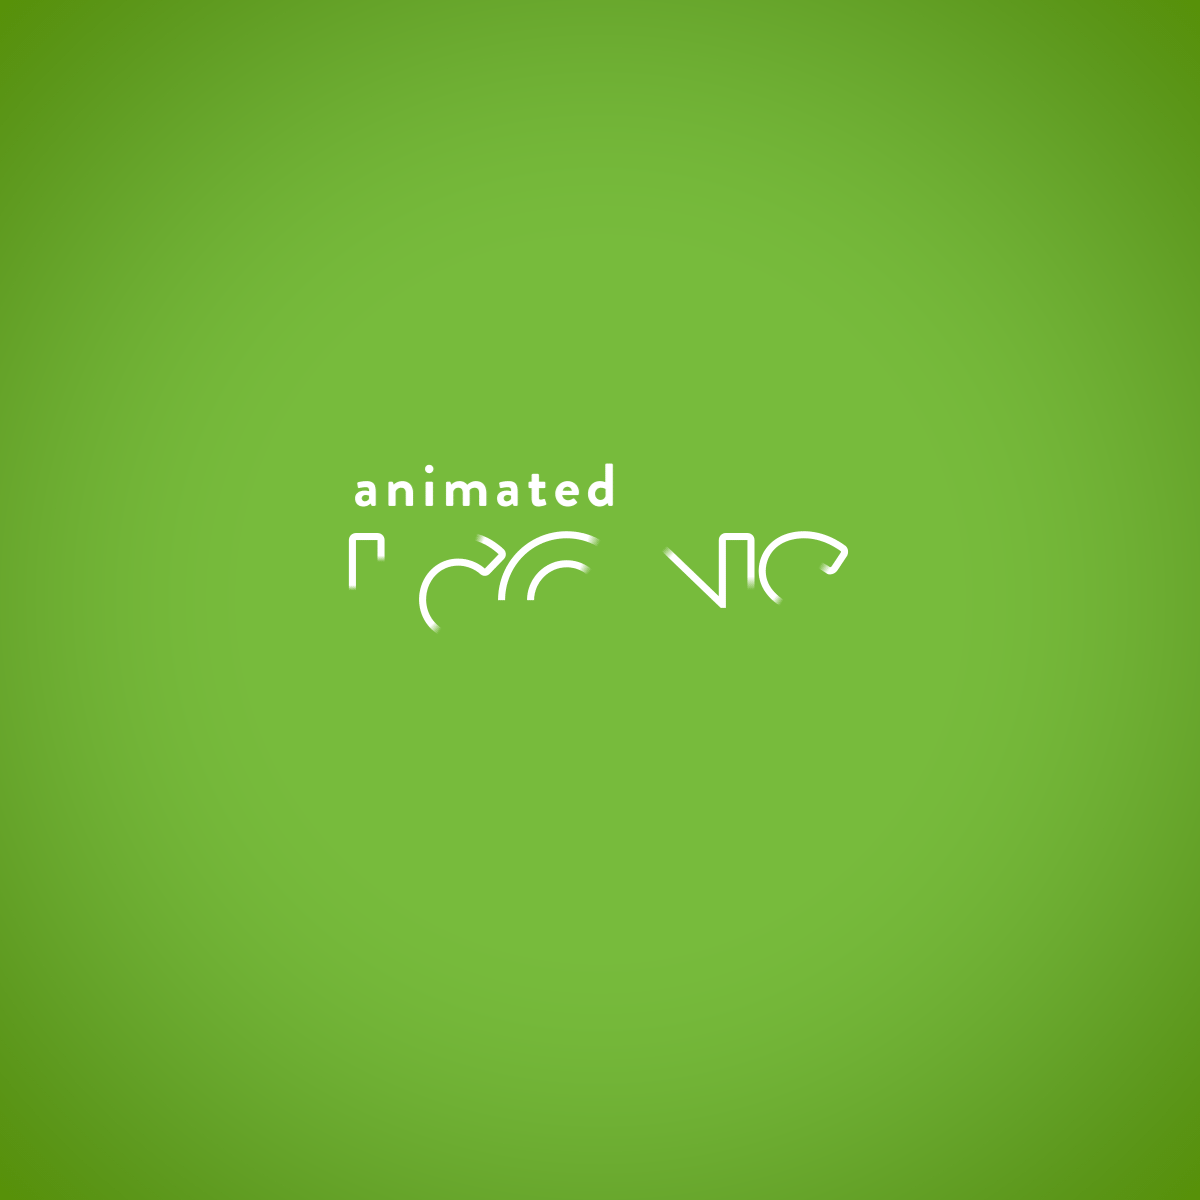 animated-icon-text